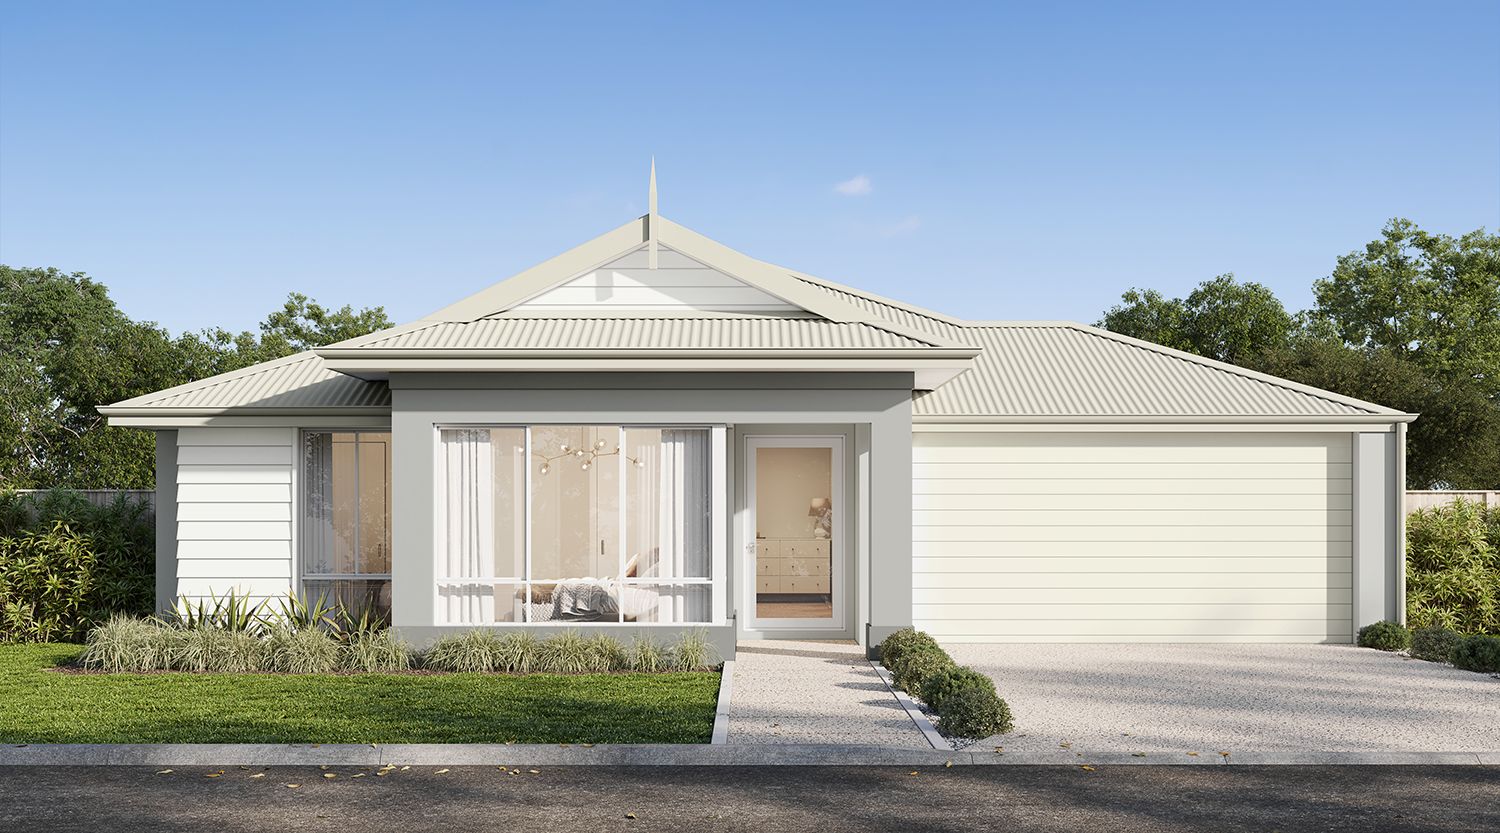 4 bedrooms New House & Land in Lot 49 Lillypilly Loop SINAGRA WA, 6065